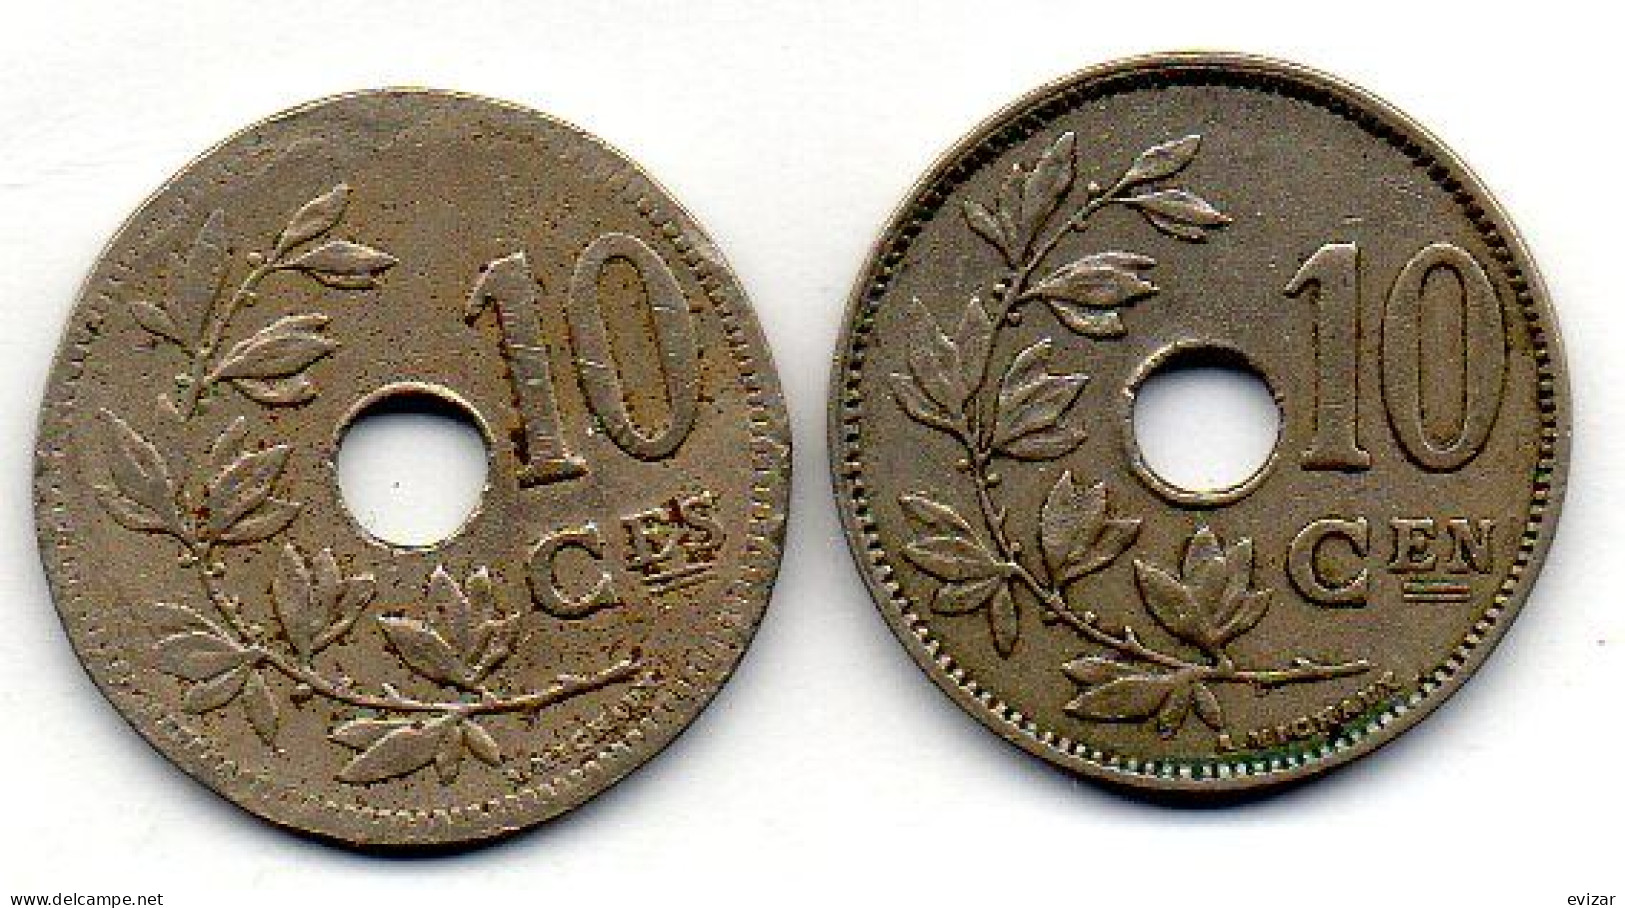 BELGIUM - Set Of Two Coins 10 Centimes, Copper-Nickel, Year 1923, 1929, KM # 85.1, 86, French & Dutch Legend - 10 Cent